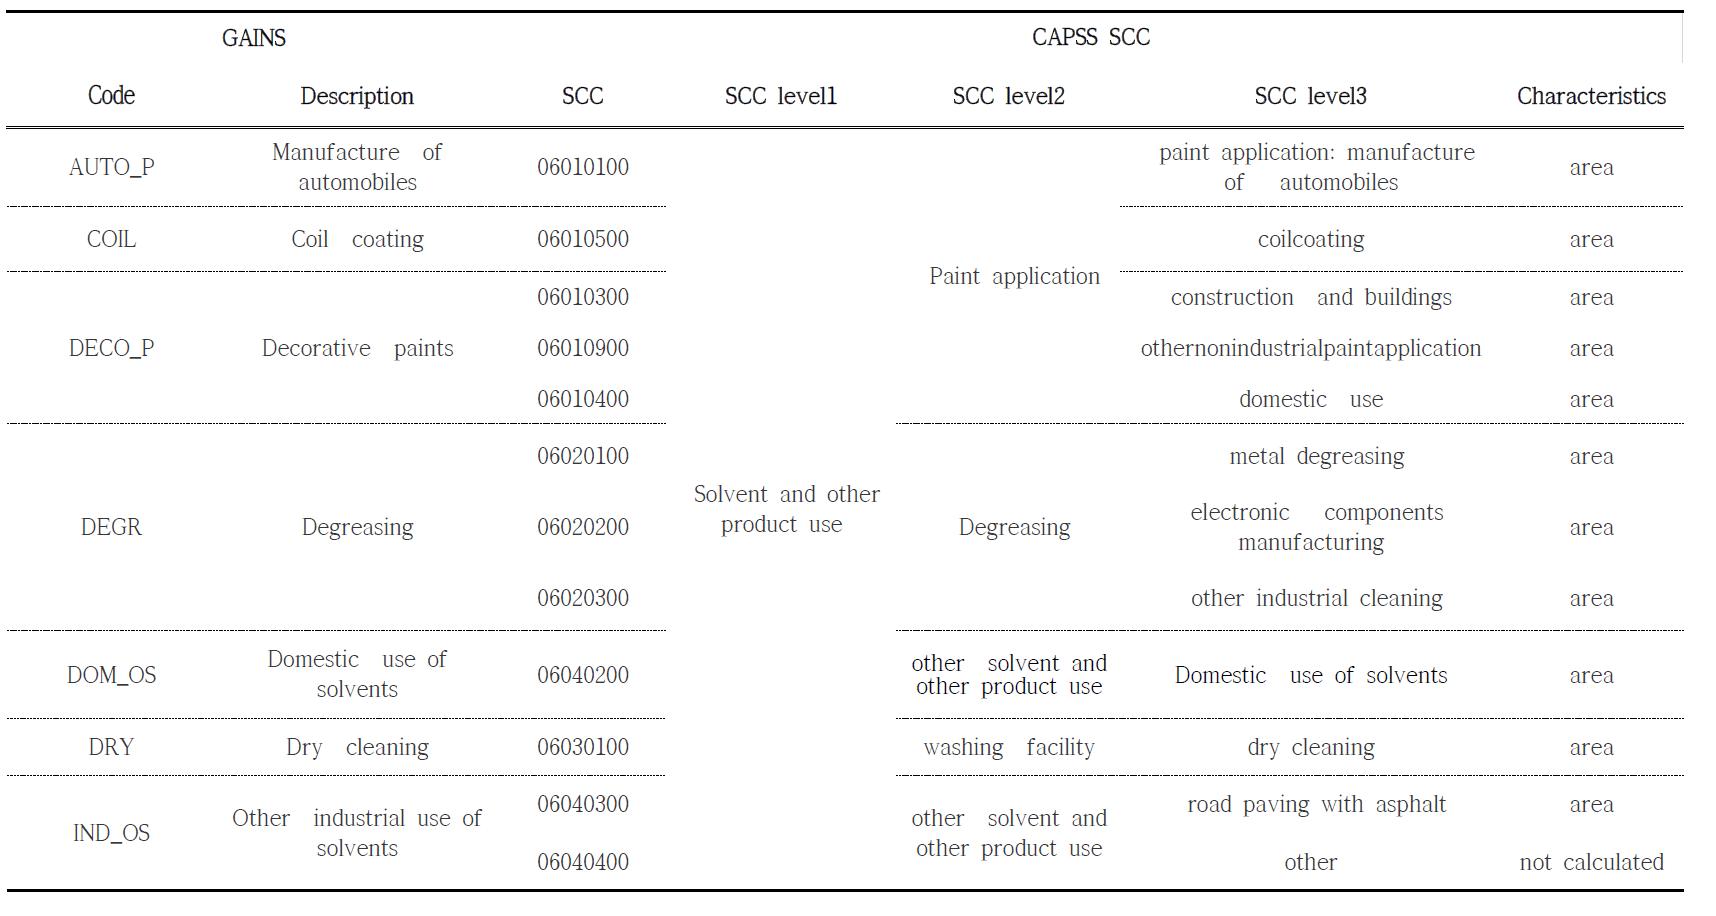 Example of mapping table of source and fuel classification between CAPSS and GAINS systems for VOC sector.